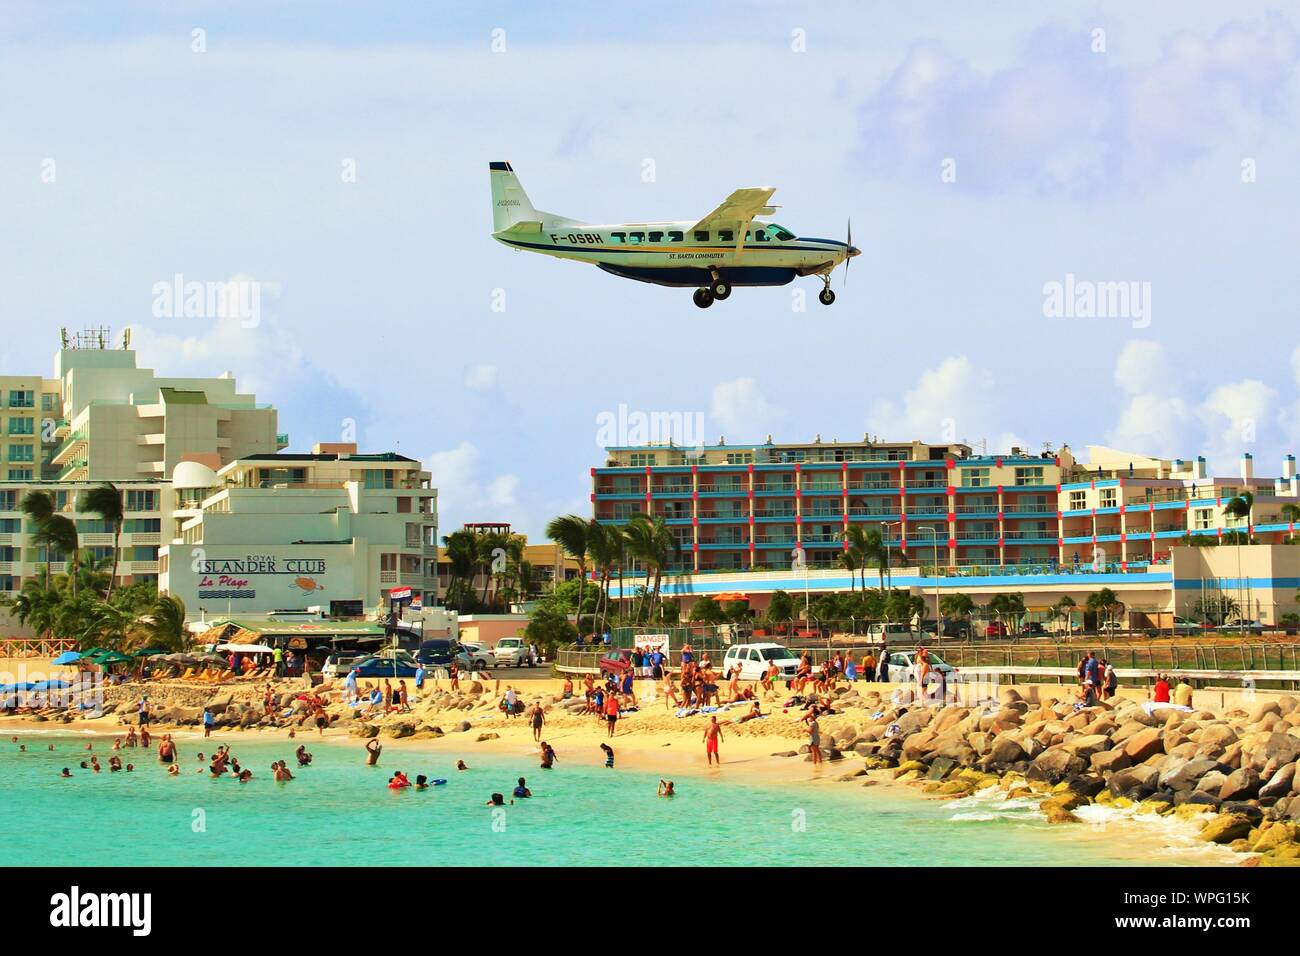 A St Barth Commuter F-0SBH Cessna Caravan propeller plane, flies low over Maho beach as it comes in to land at SXM Princess Juliana Airport. Stock Photo